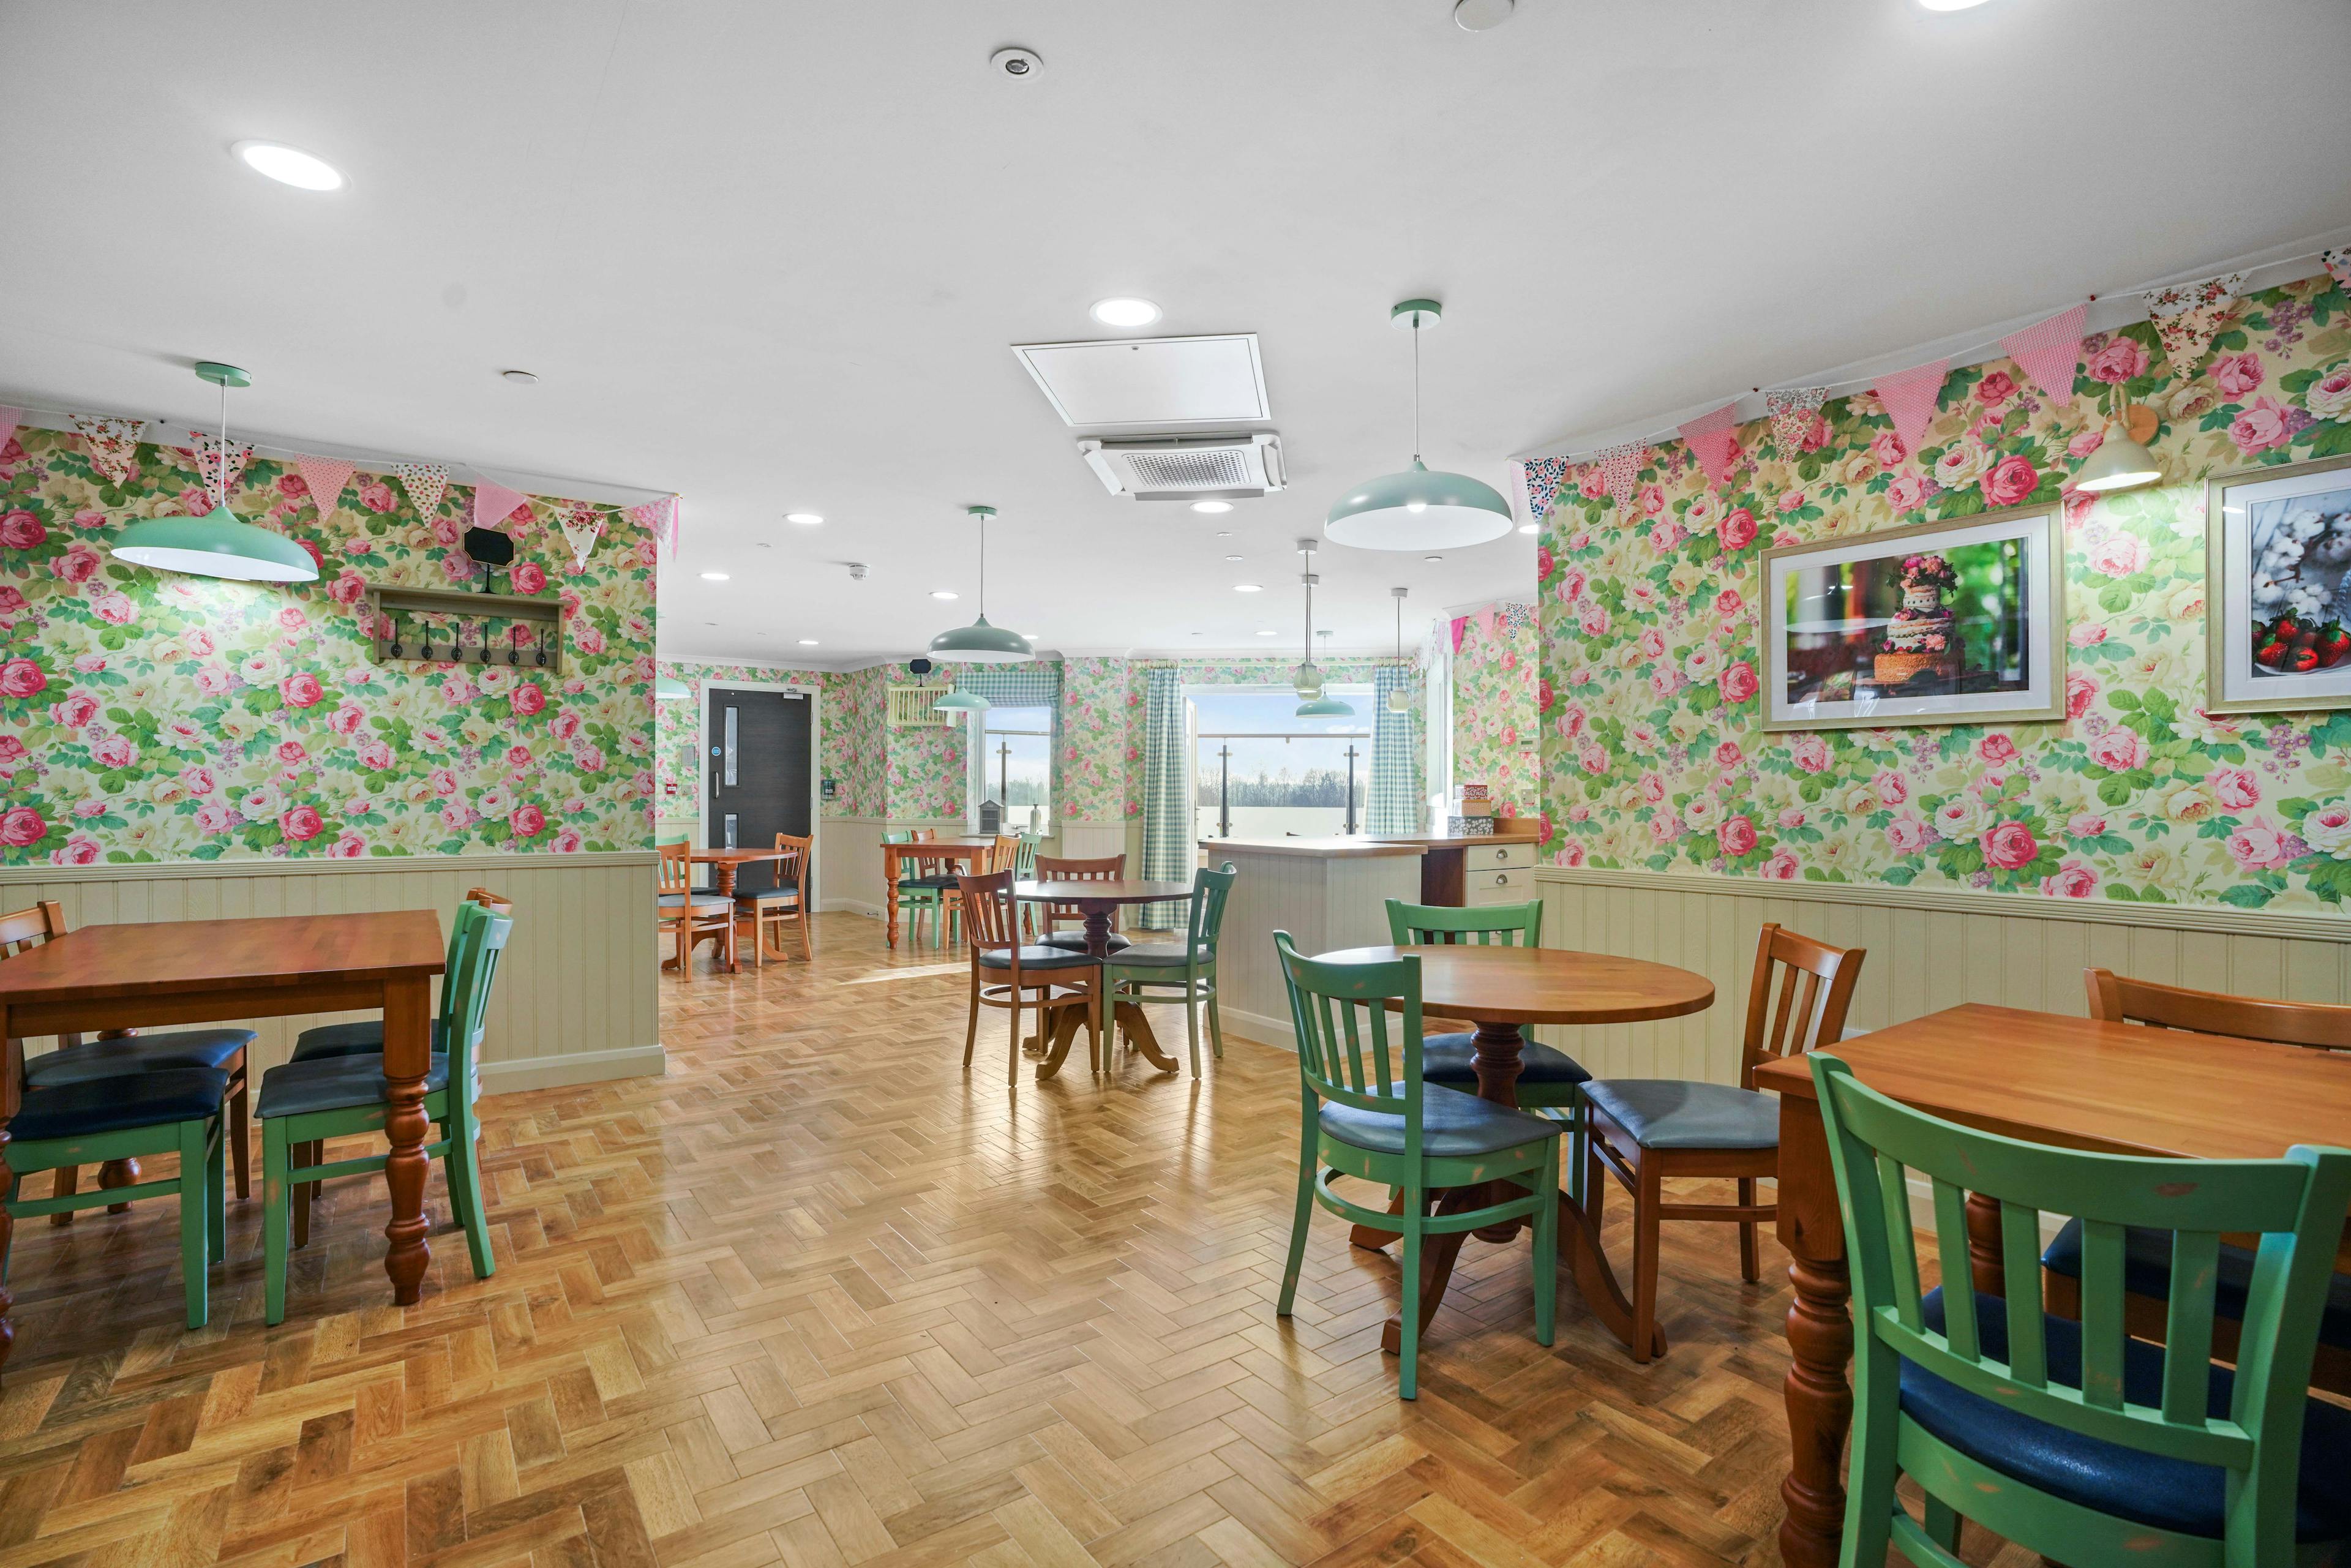 Dining room of Cloverleaf care home in Lincoln, Lincolnshire